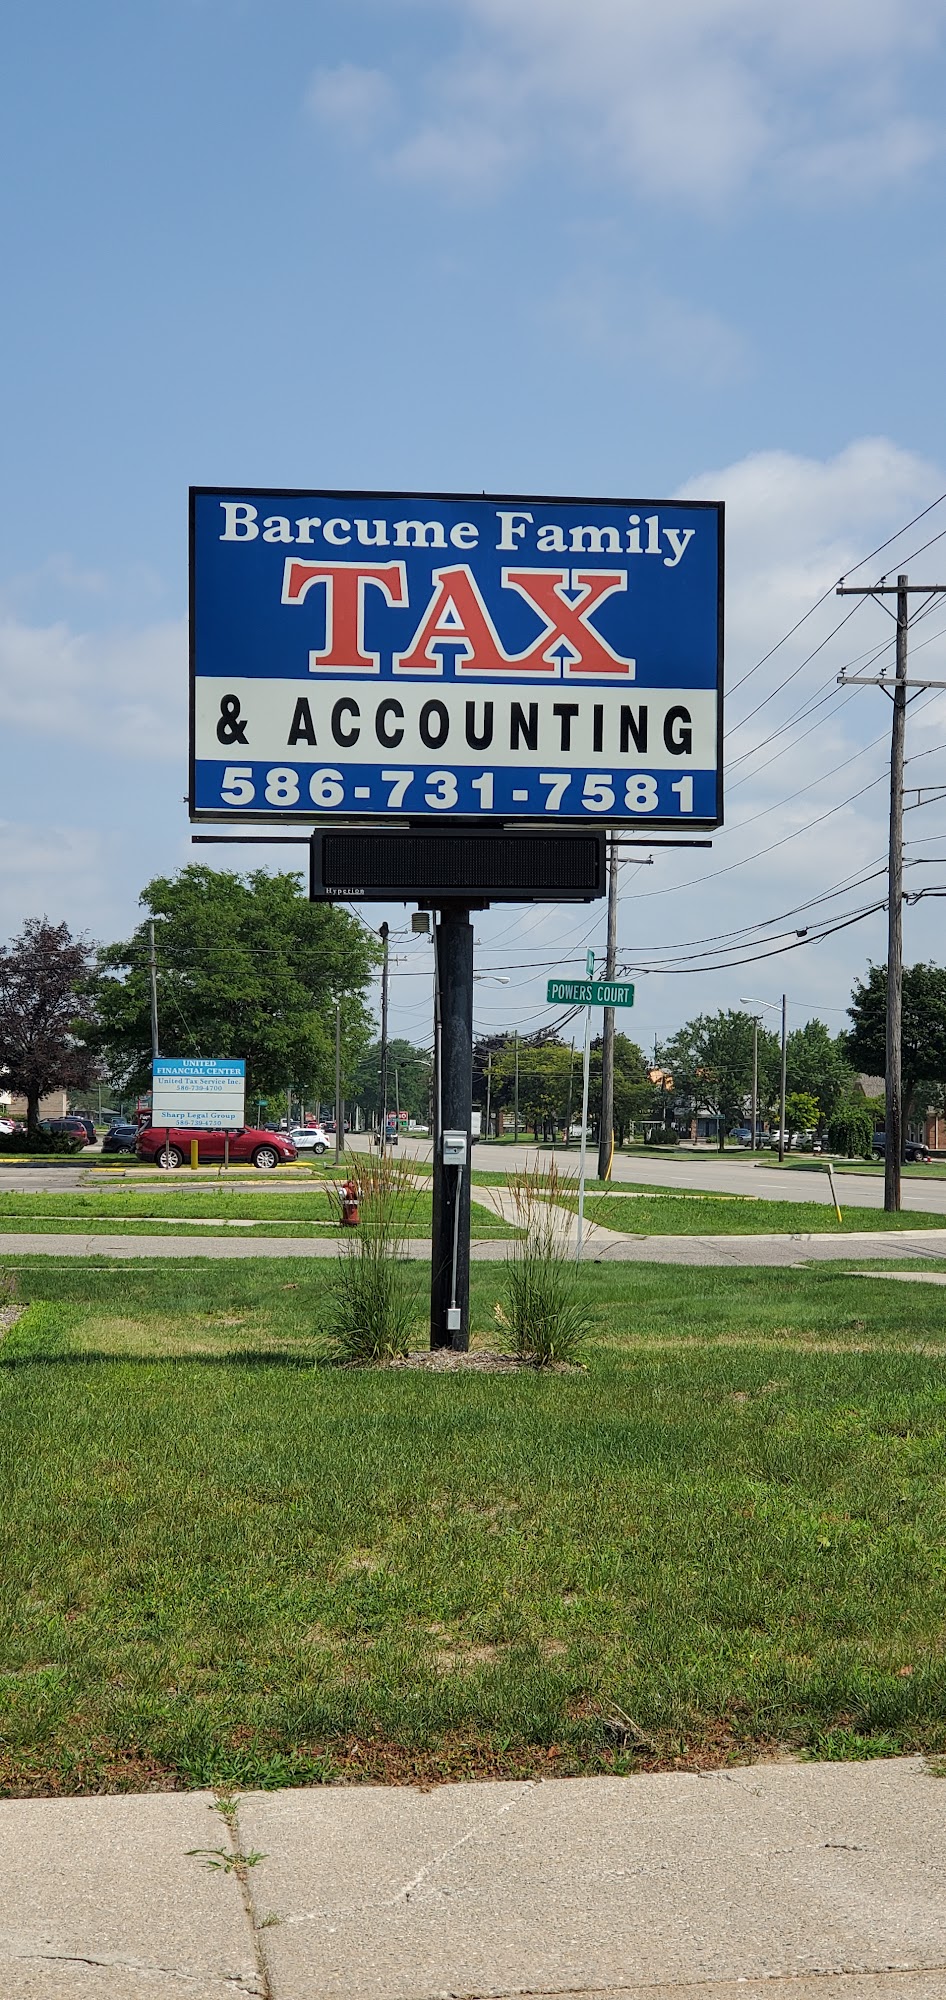 Barcume Family Tax Services